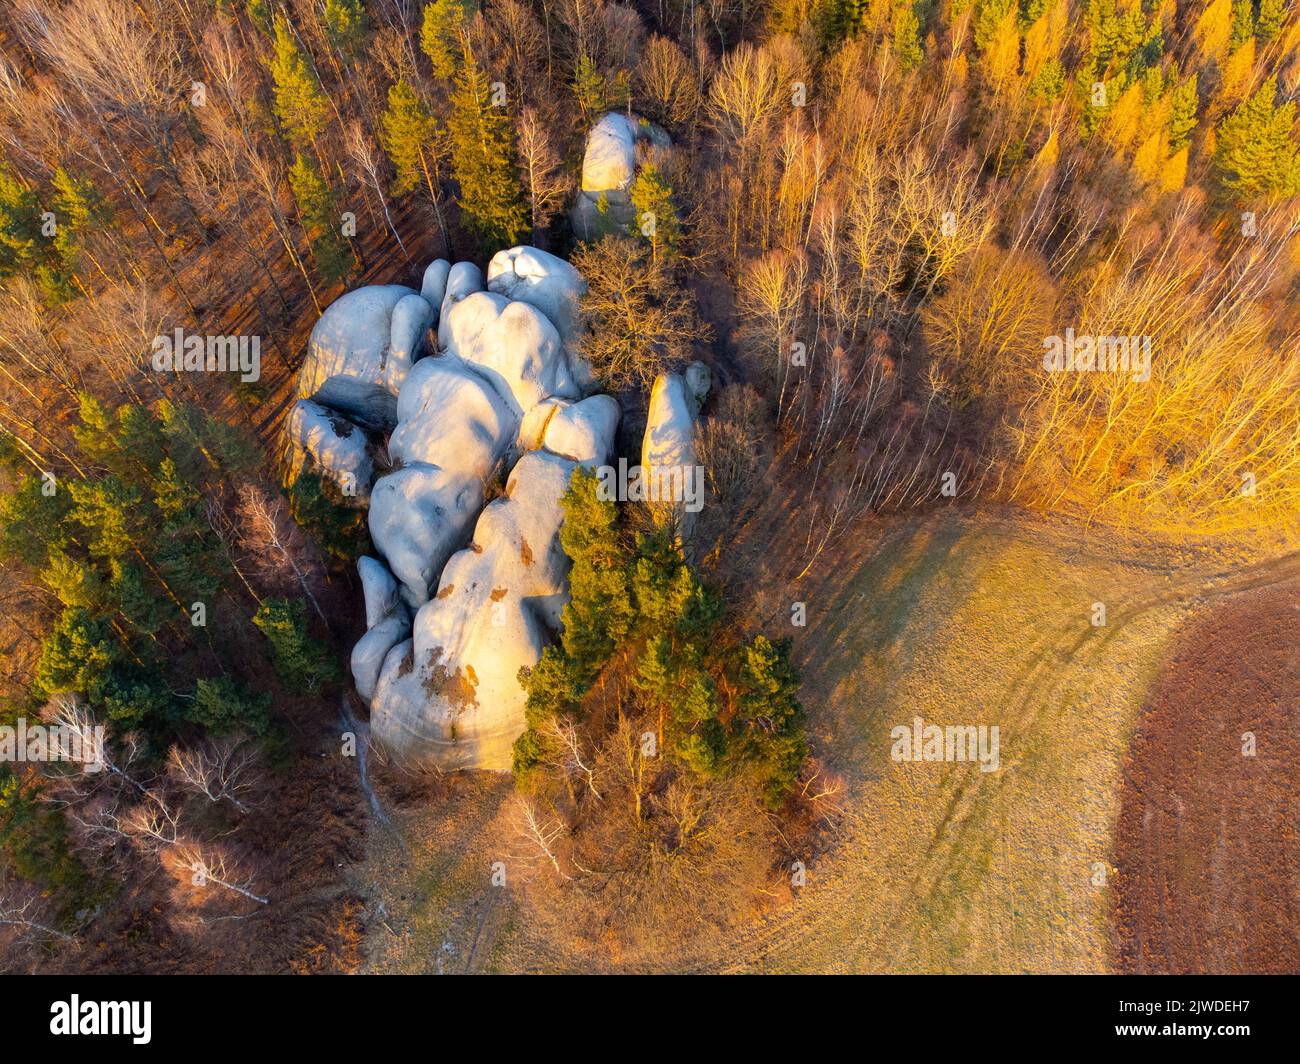 White rocks or Elephant rocks from above Stock Photo